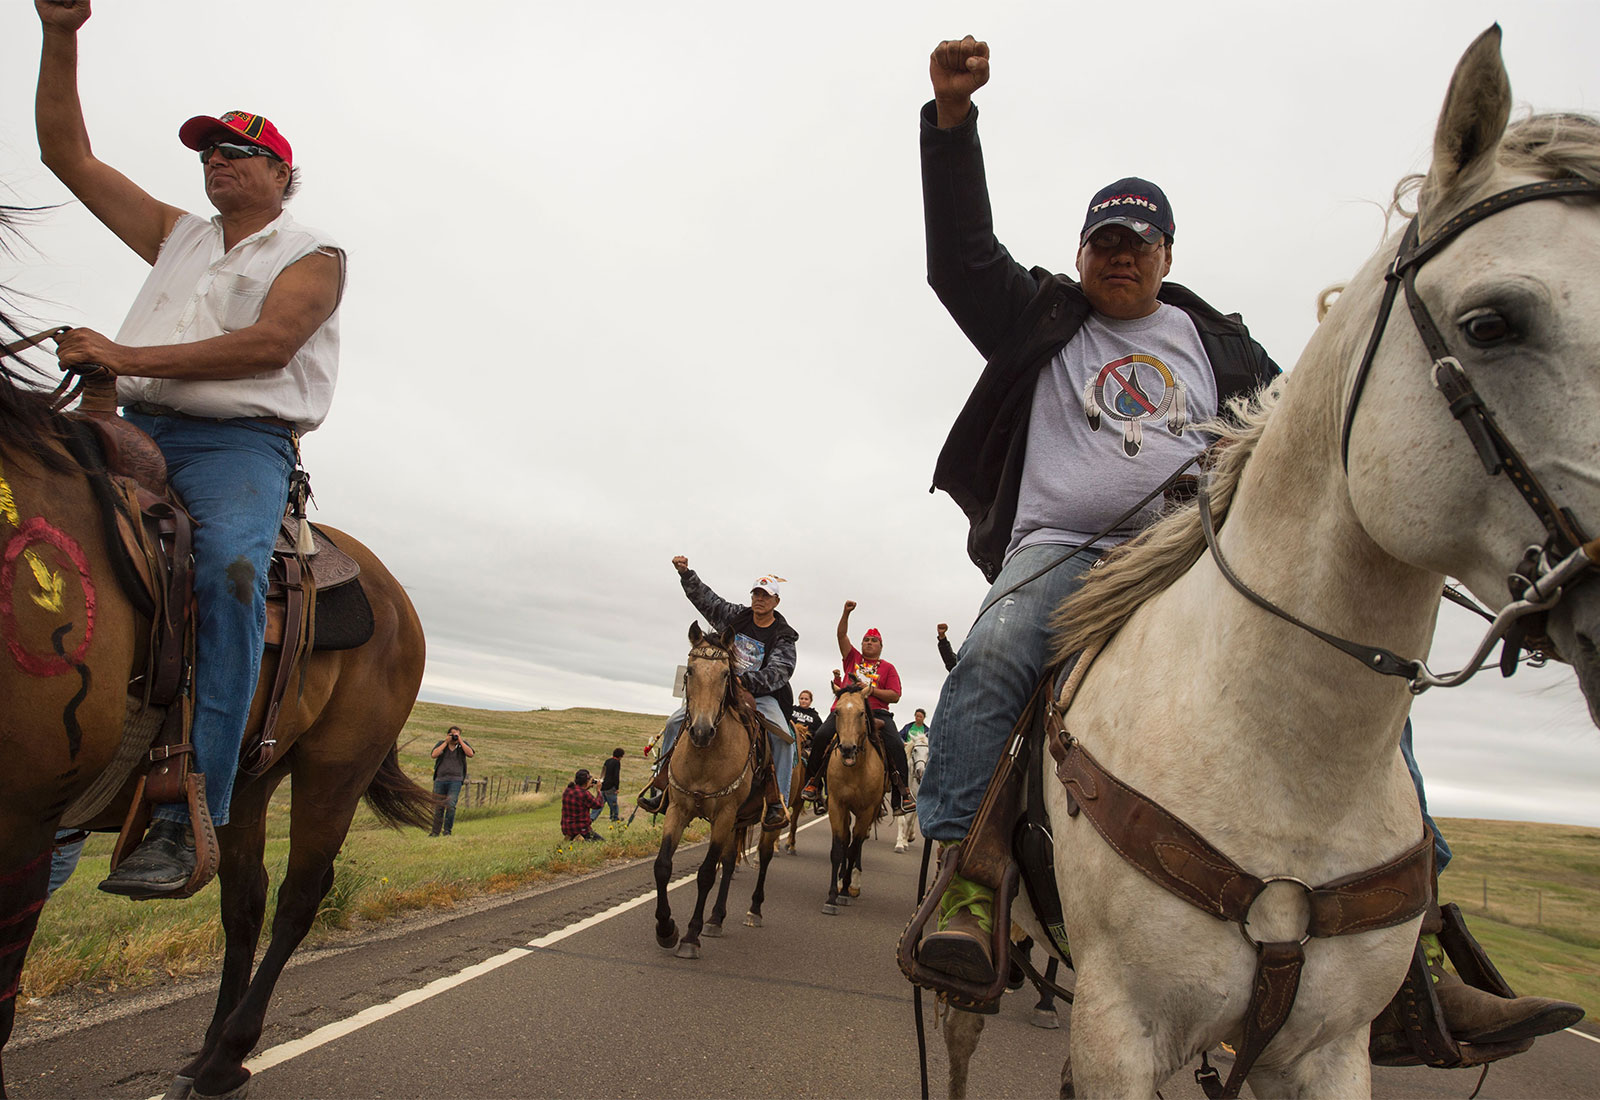 People riding horses raise their fists in protest of the Dakota Access Pipeline